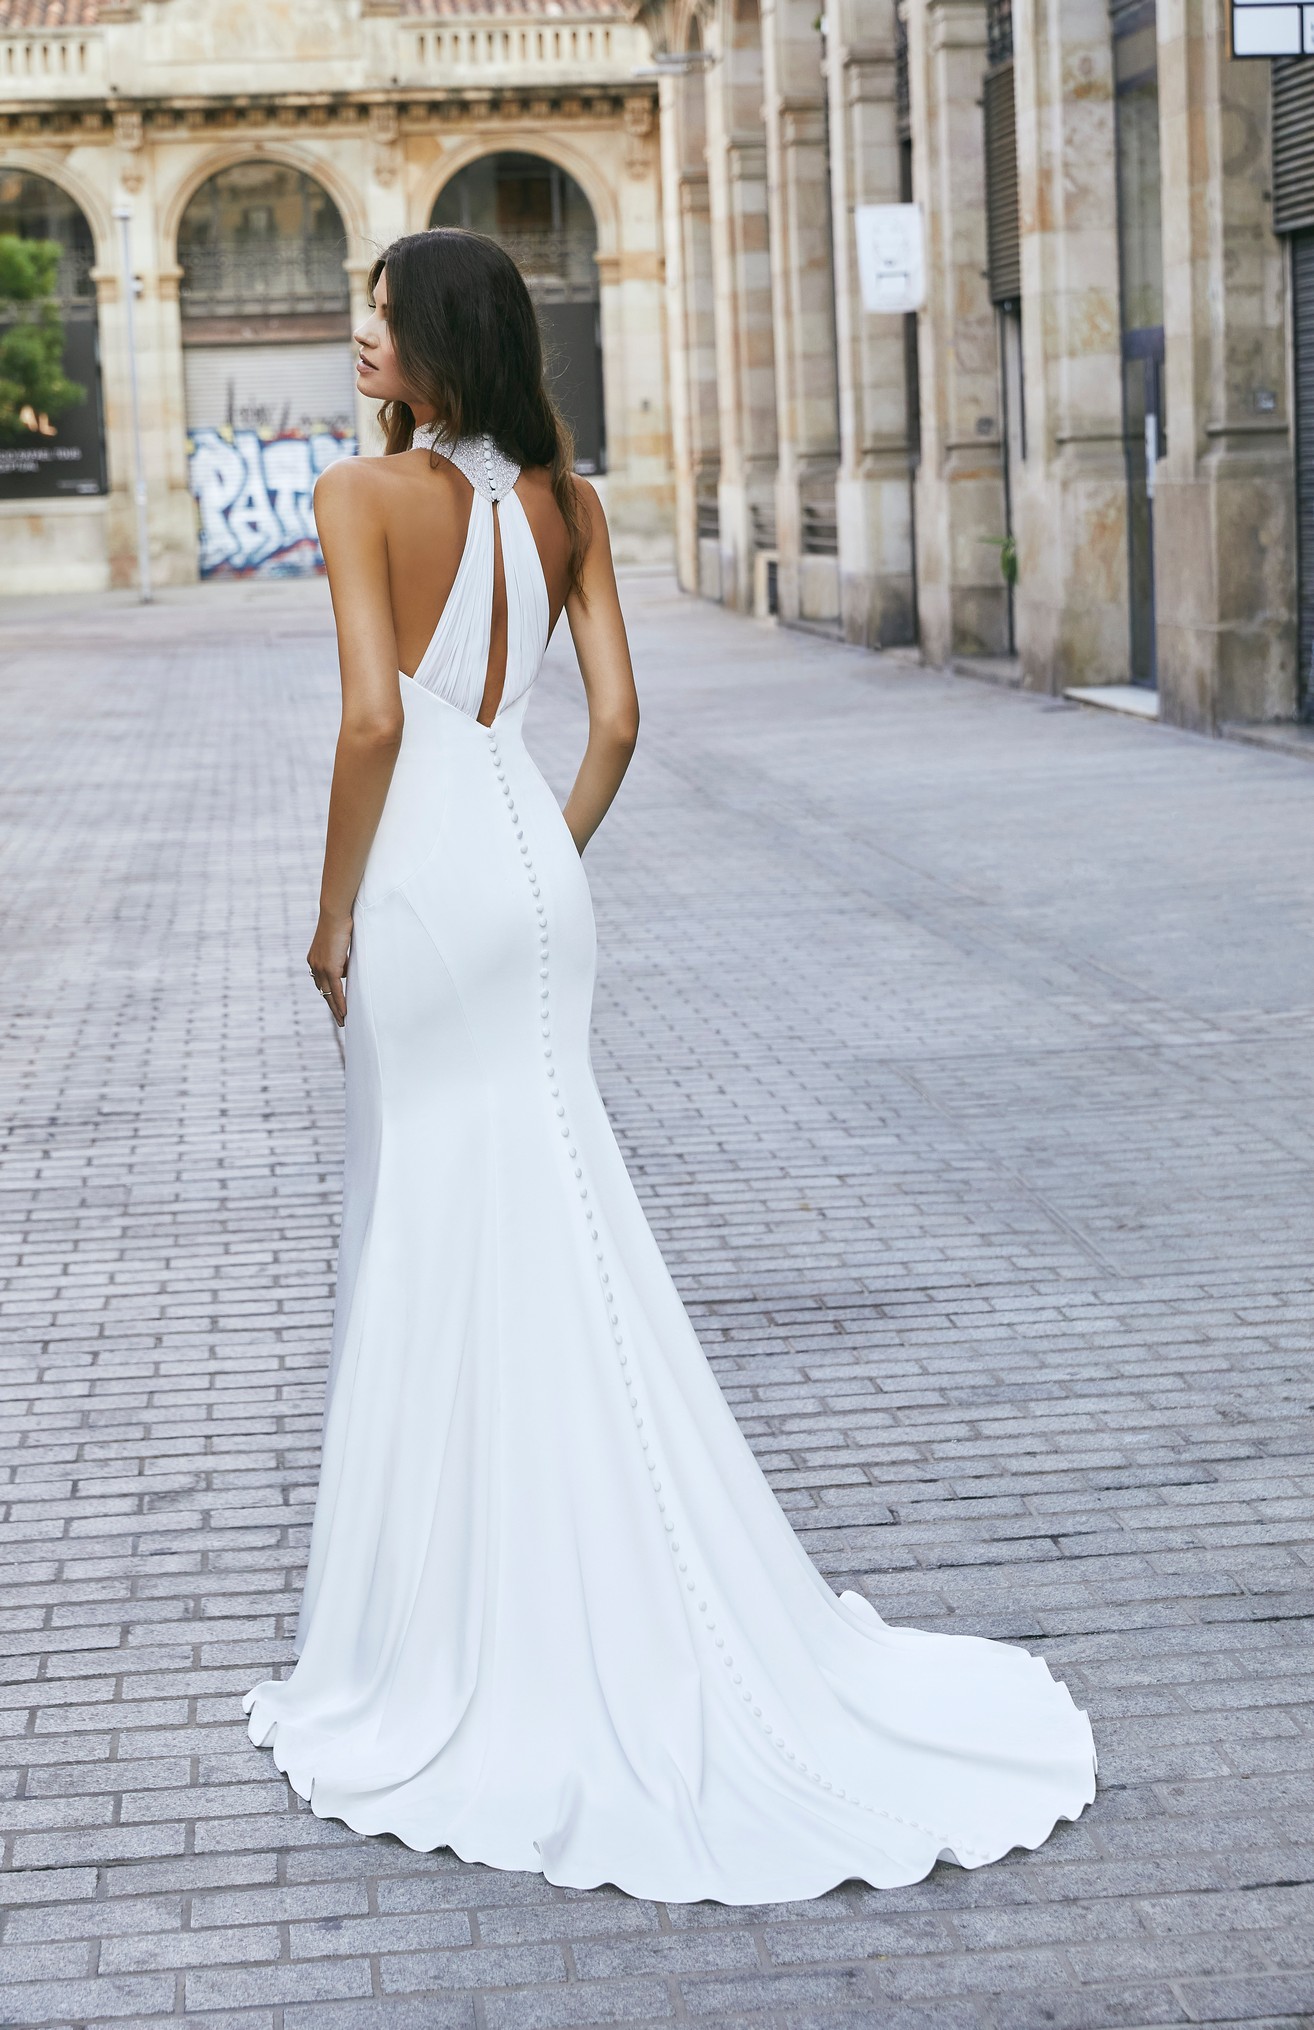 Back view of model in Ronald Joyce destination wedding dress style 18614, a plain fit and flare dress with a beaded halter neckline and keyhole open back